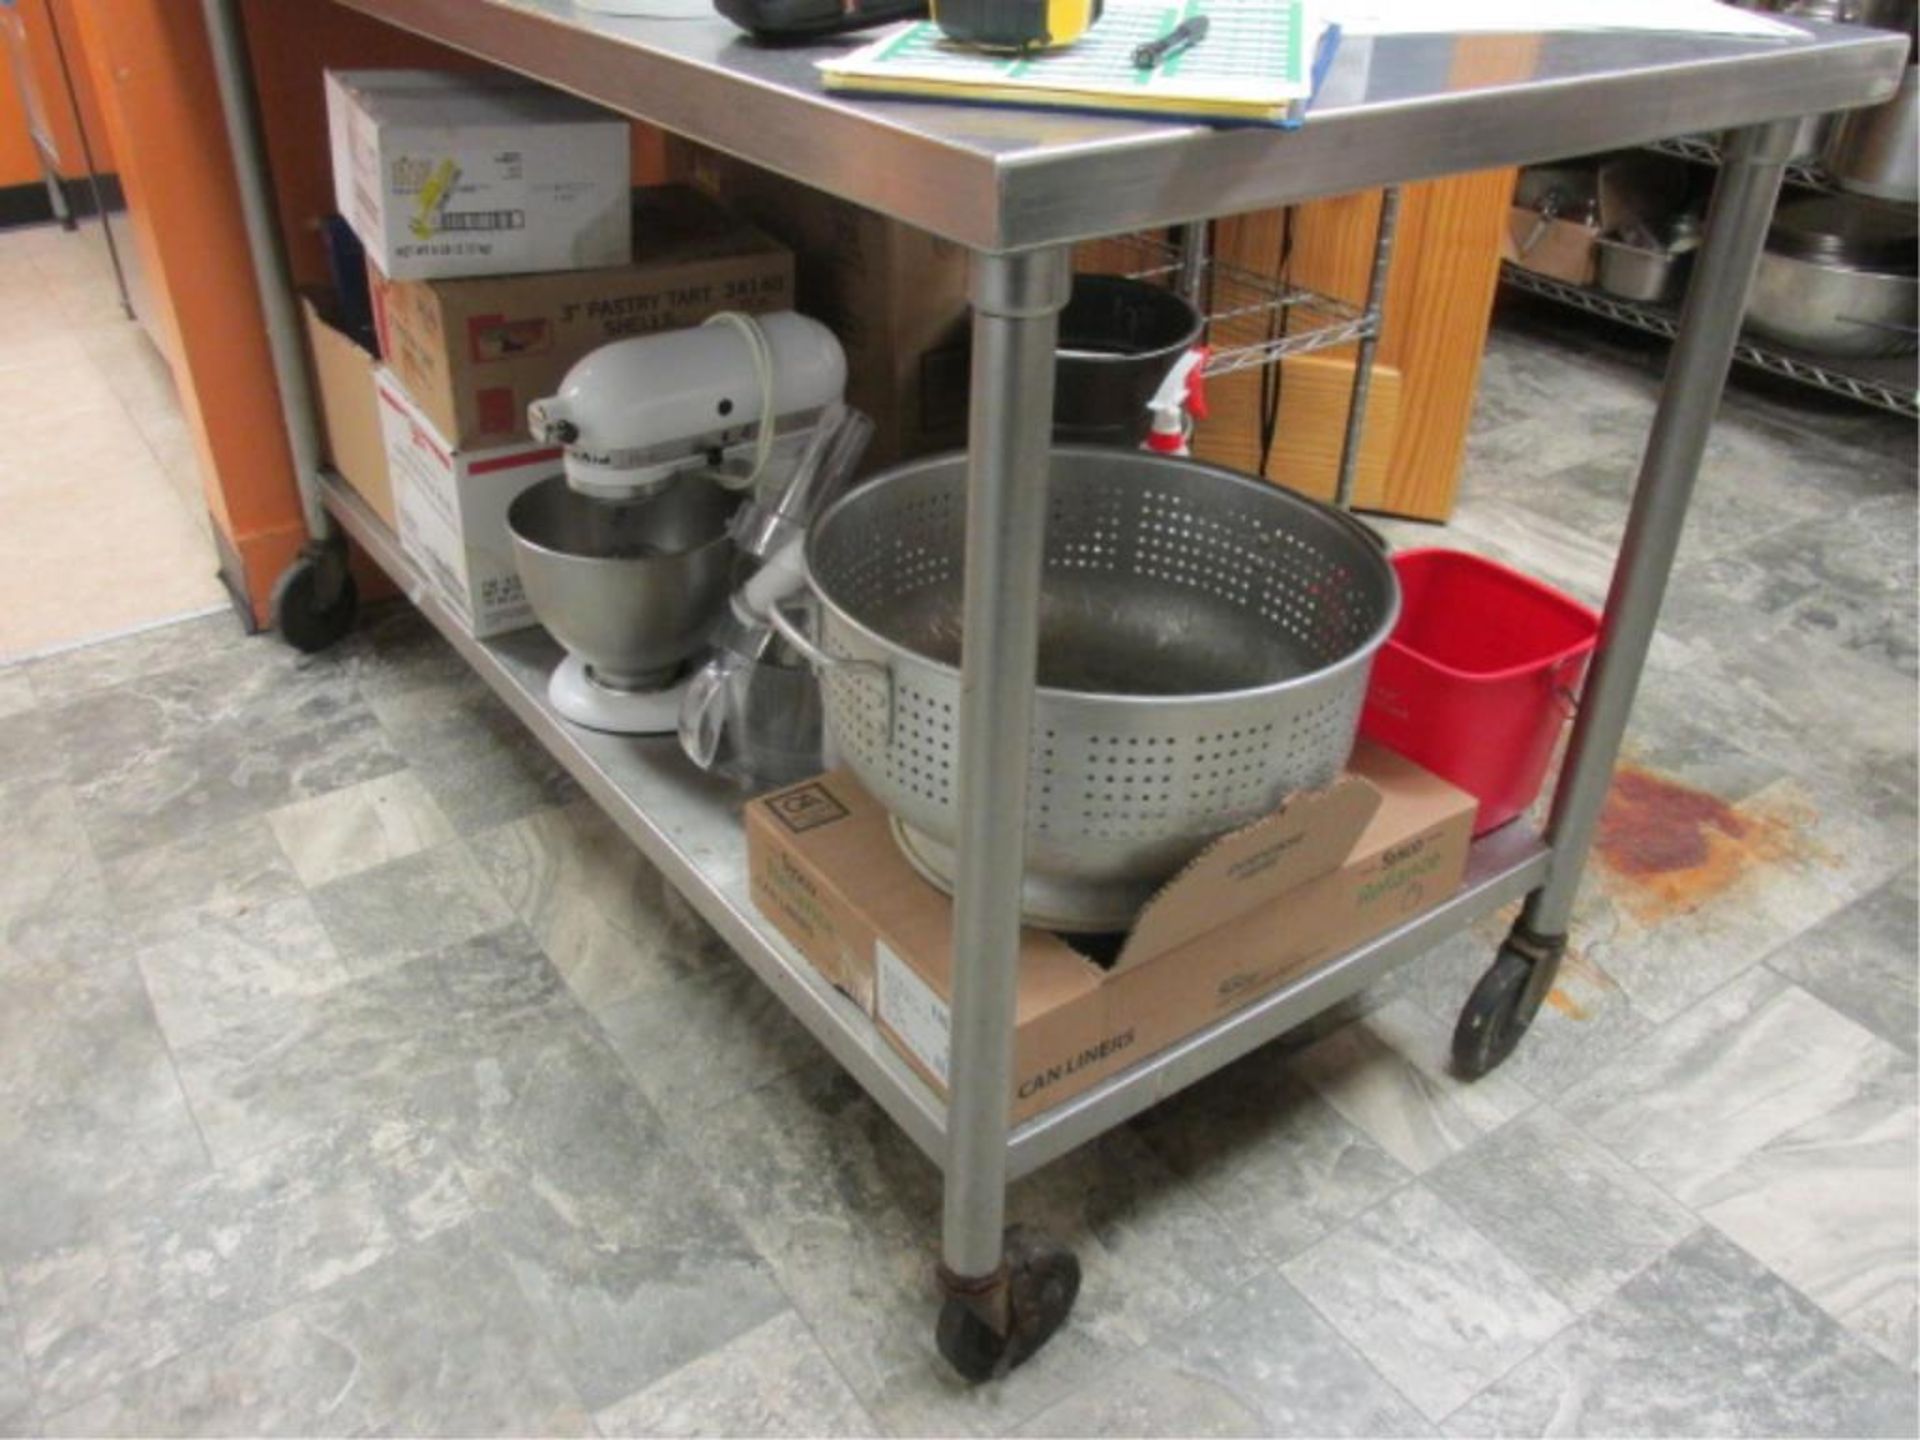 Stainless Steel Portable Prep Table, 30" X 60". HIT# 2234851. Loc: Prep Room. Asset Located at 143